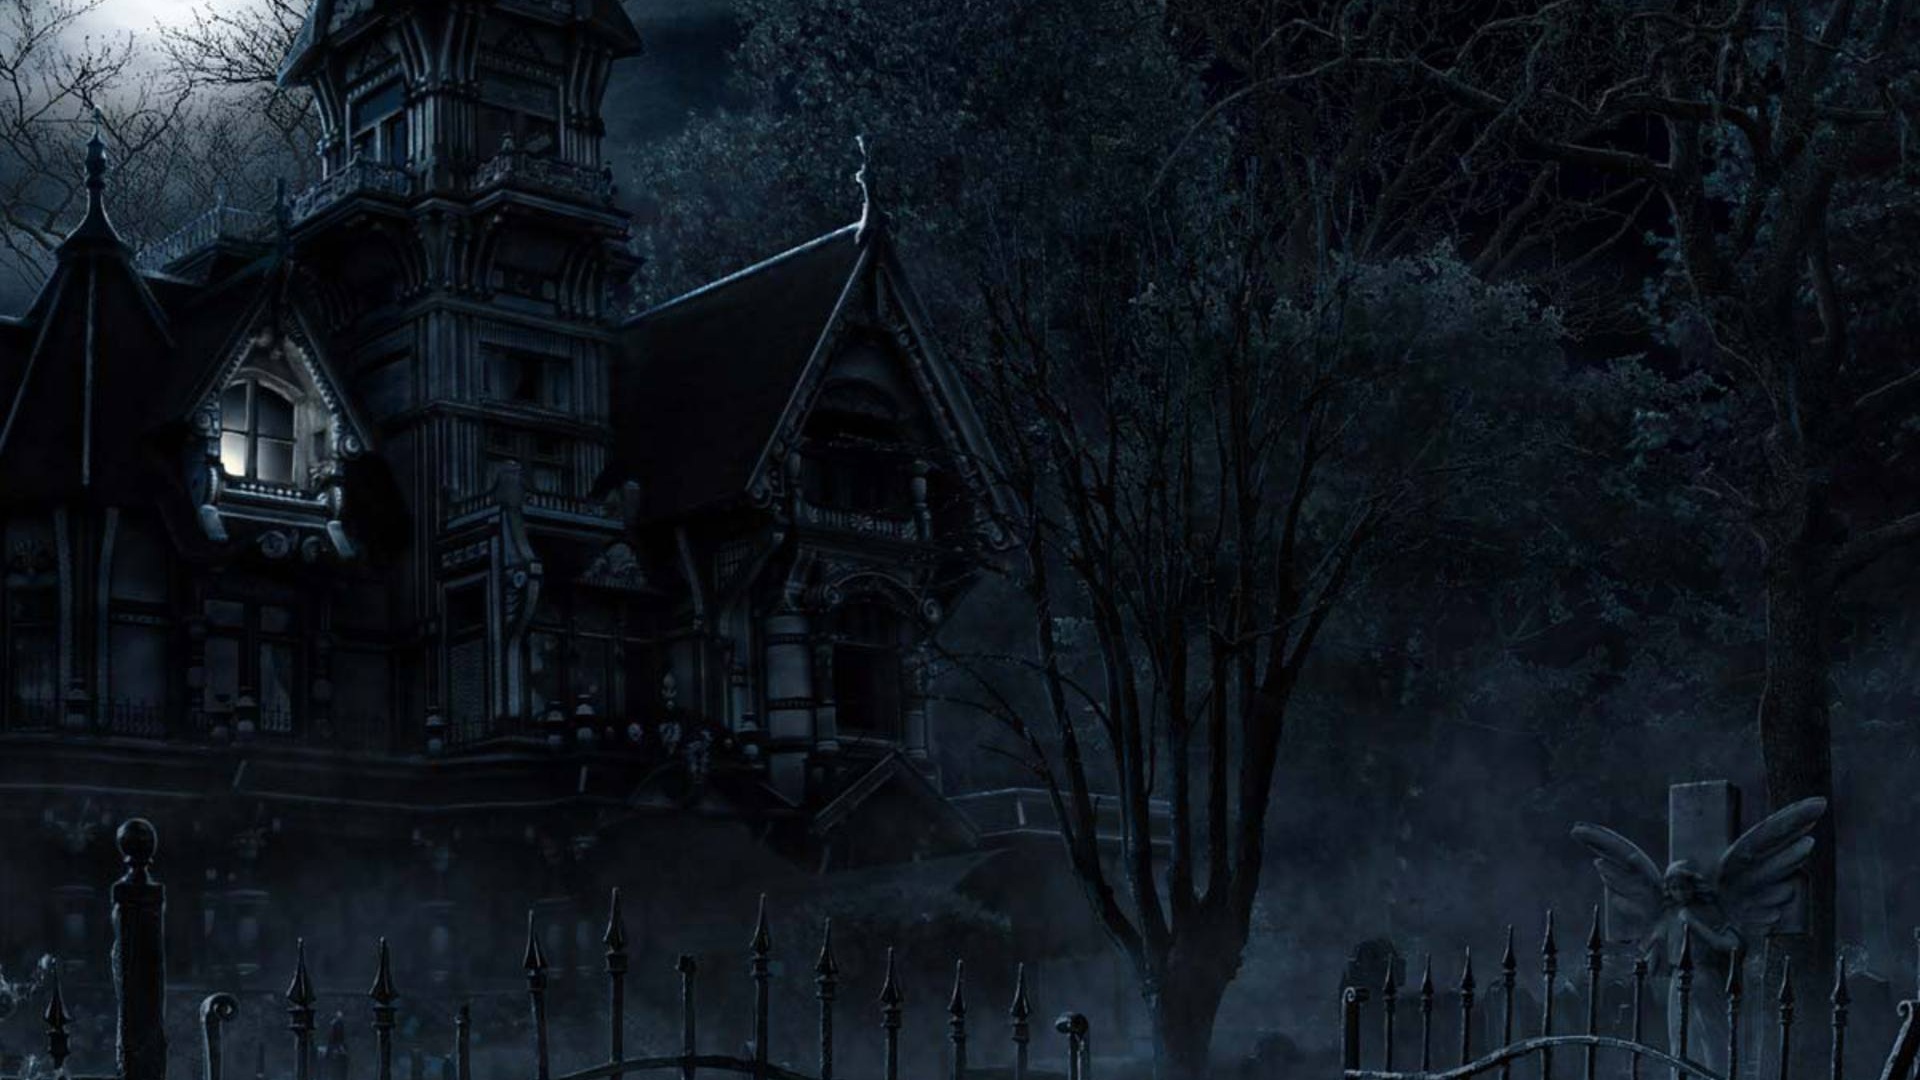 Free download Halloween Backgrounds | Wallpapers, Backgrounds ...